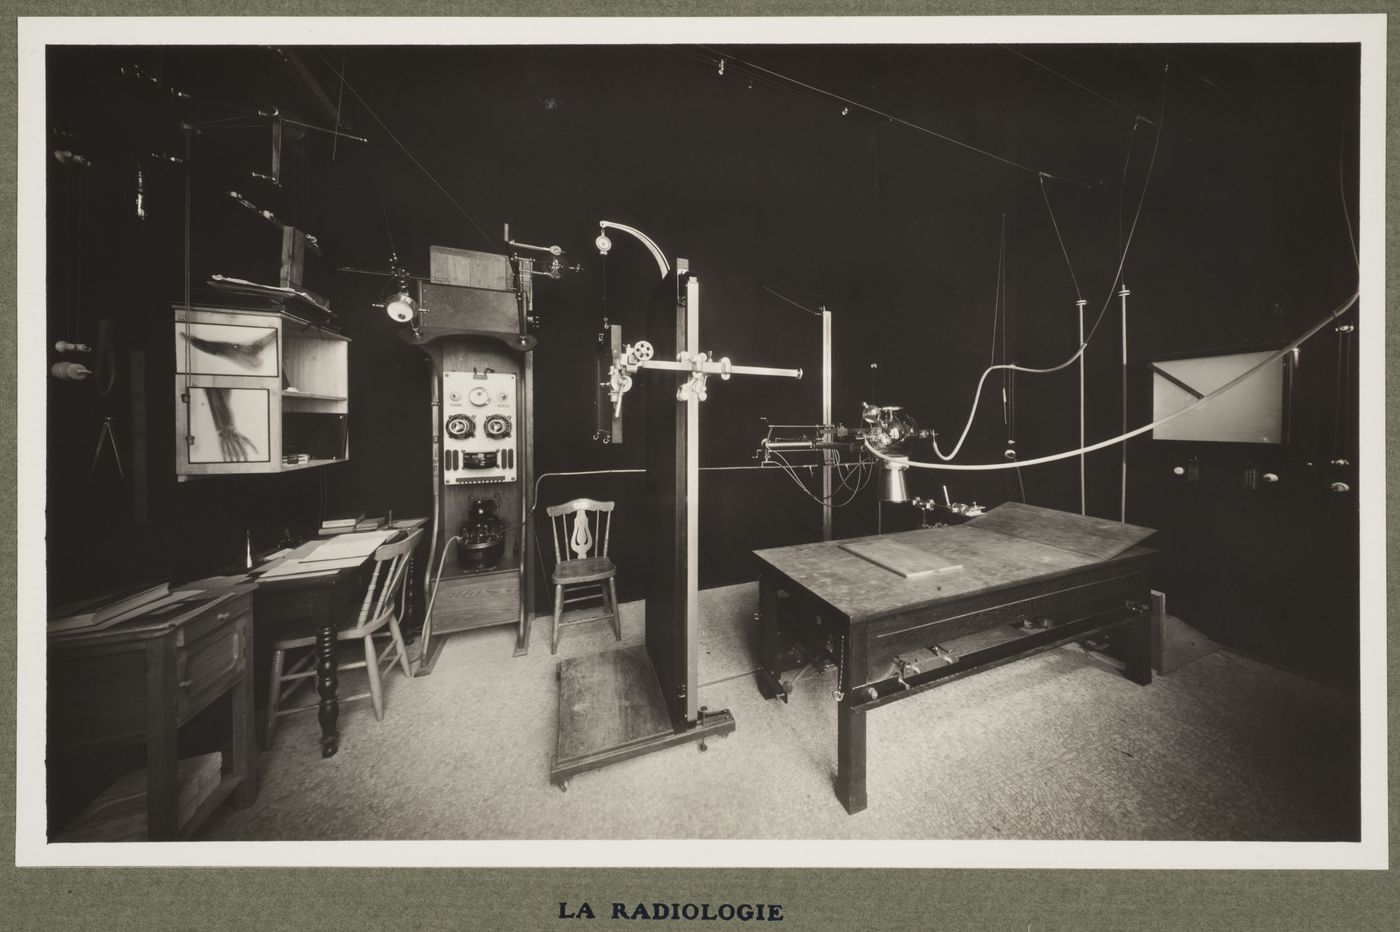 Interior of a radiology room in the military hospital housed in the Grand Palais during World War I, Paris, France